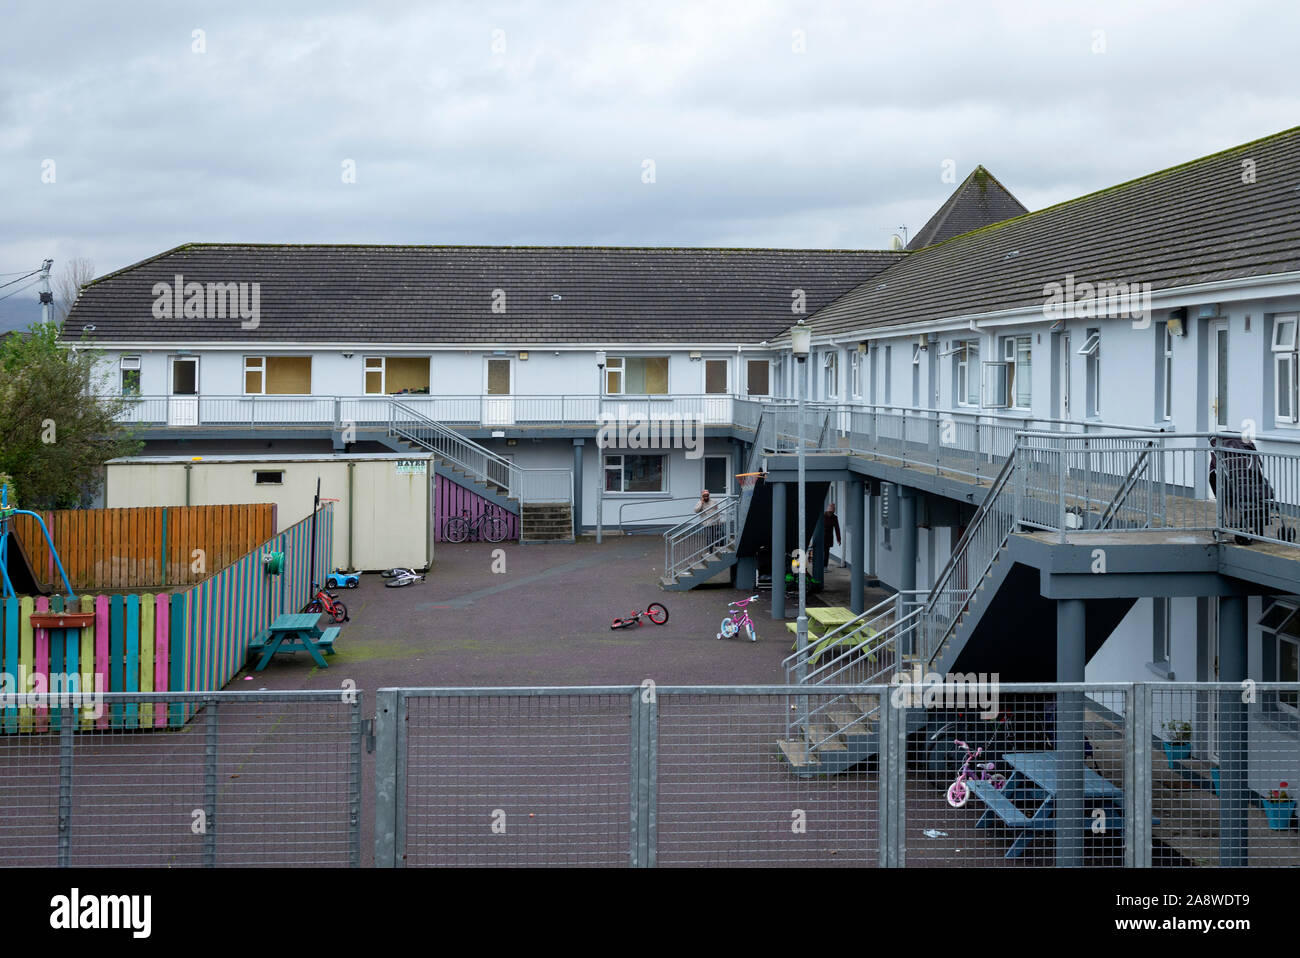 Atlas House Direct Provision Centre, the backyard play area of the Atlas House Killarney as accommodation centre for asylum seekers in Ireland. Stock Photo